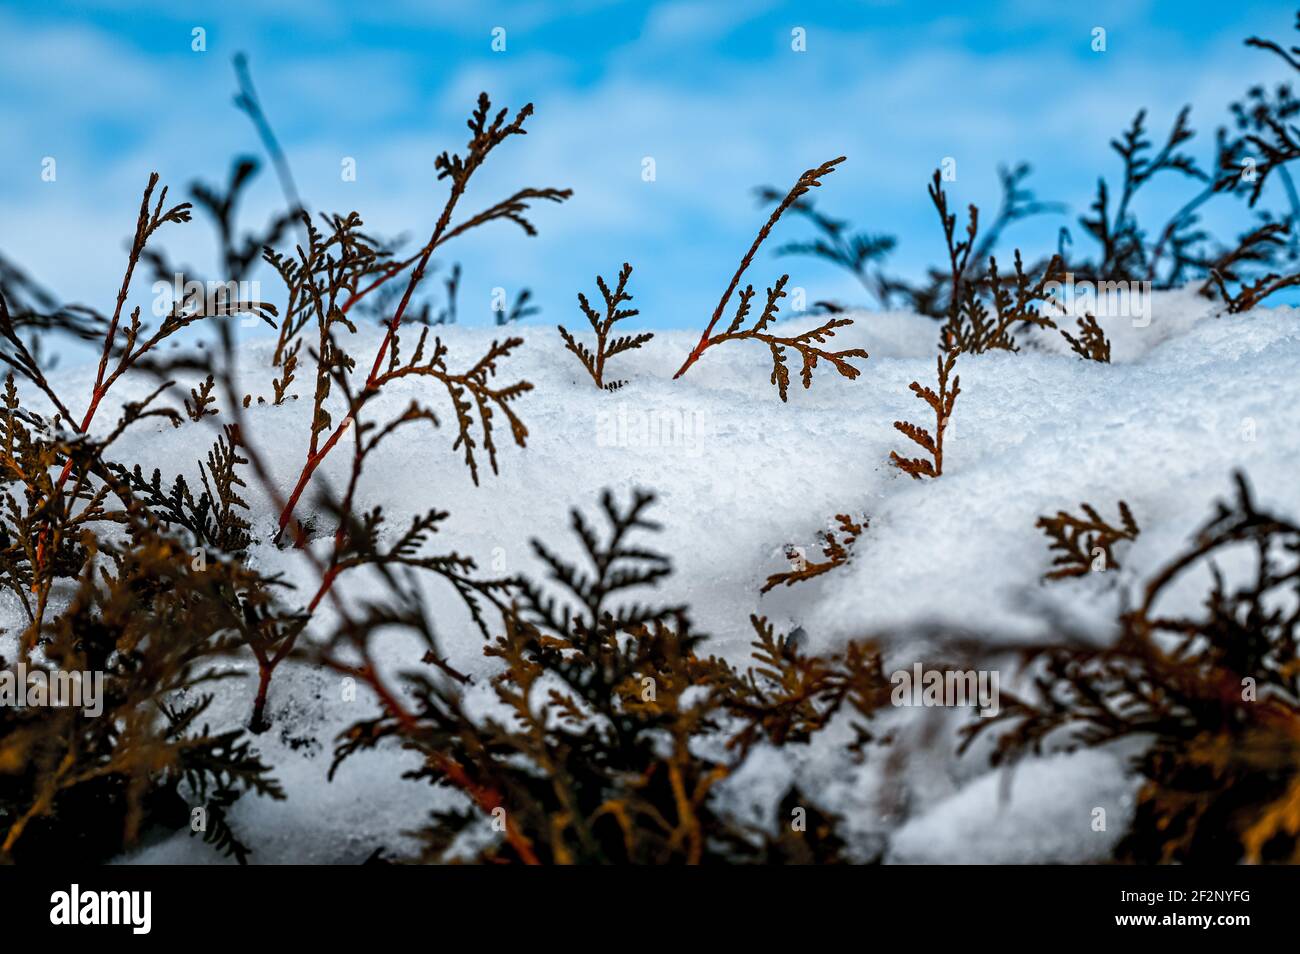 A hedge covered with snow in winter Stock Photo